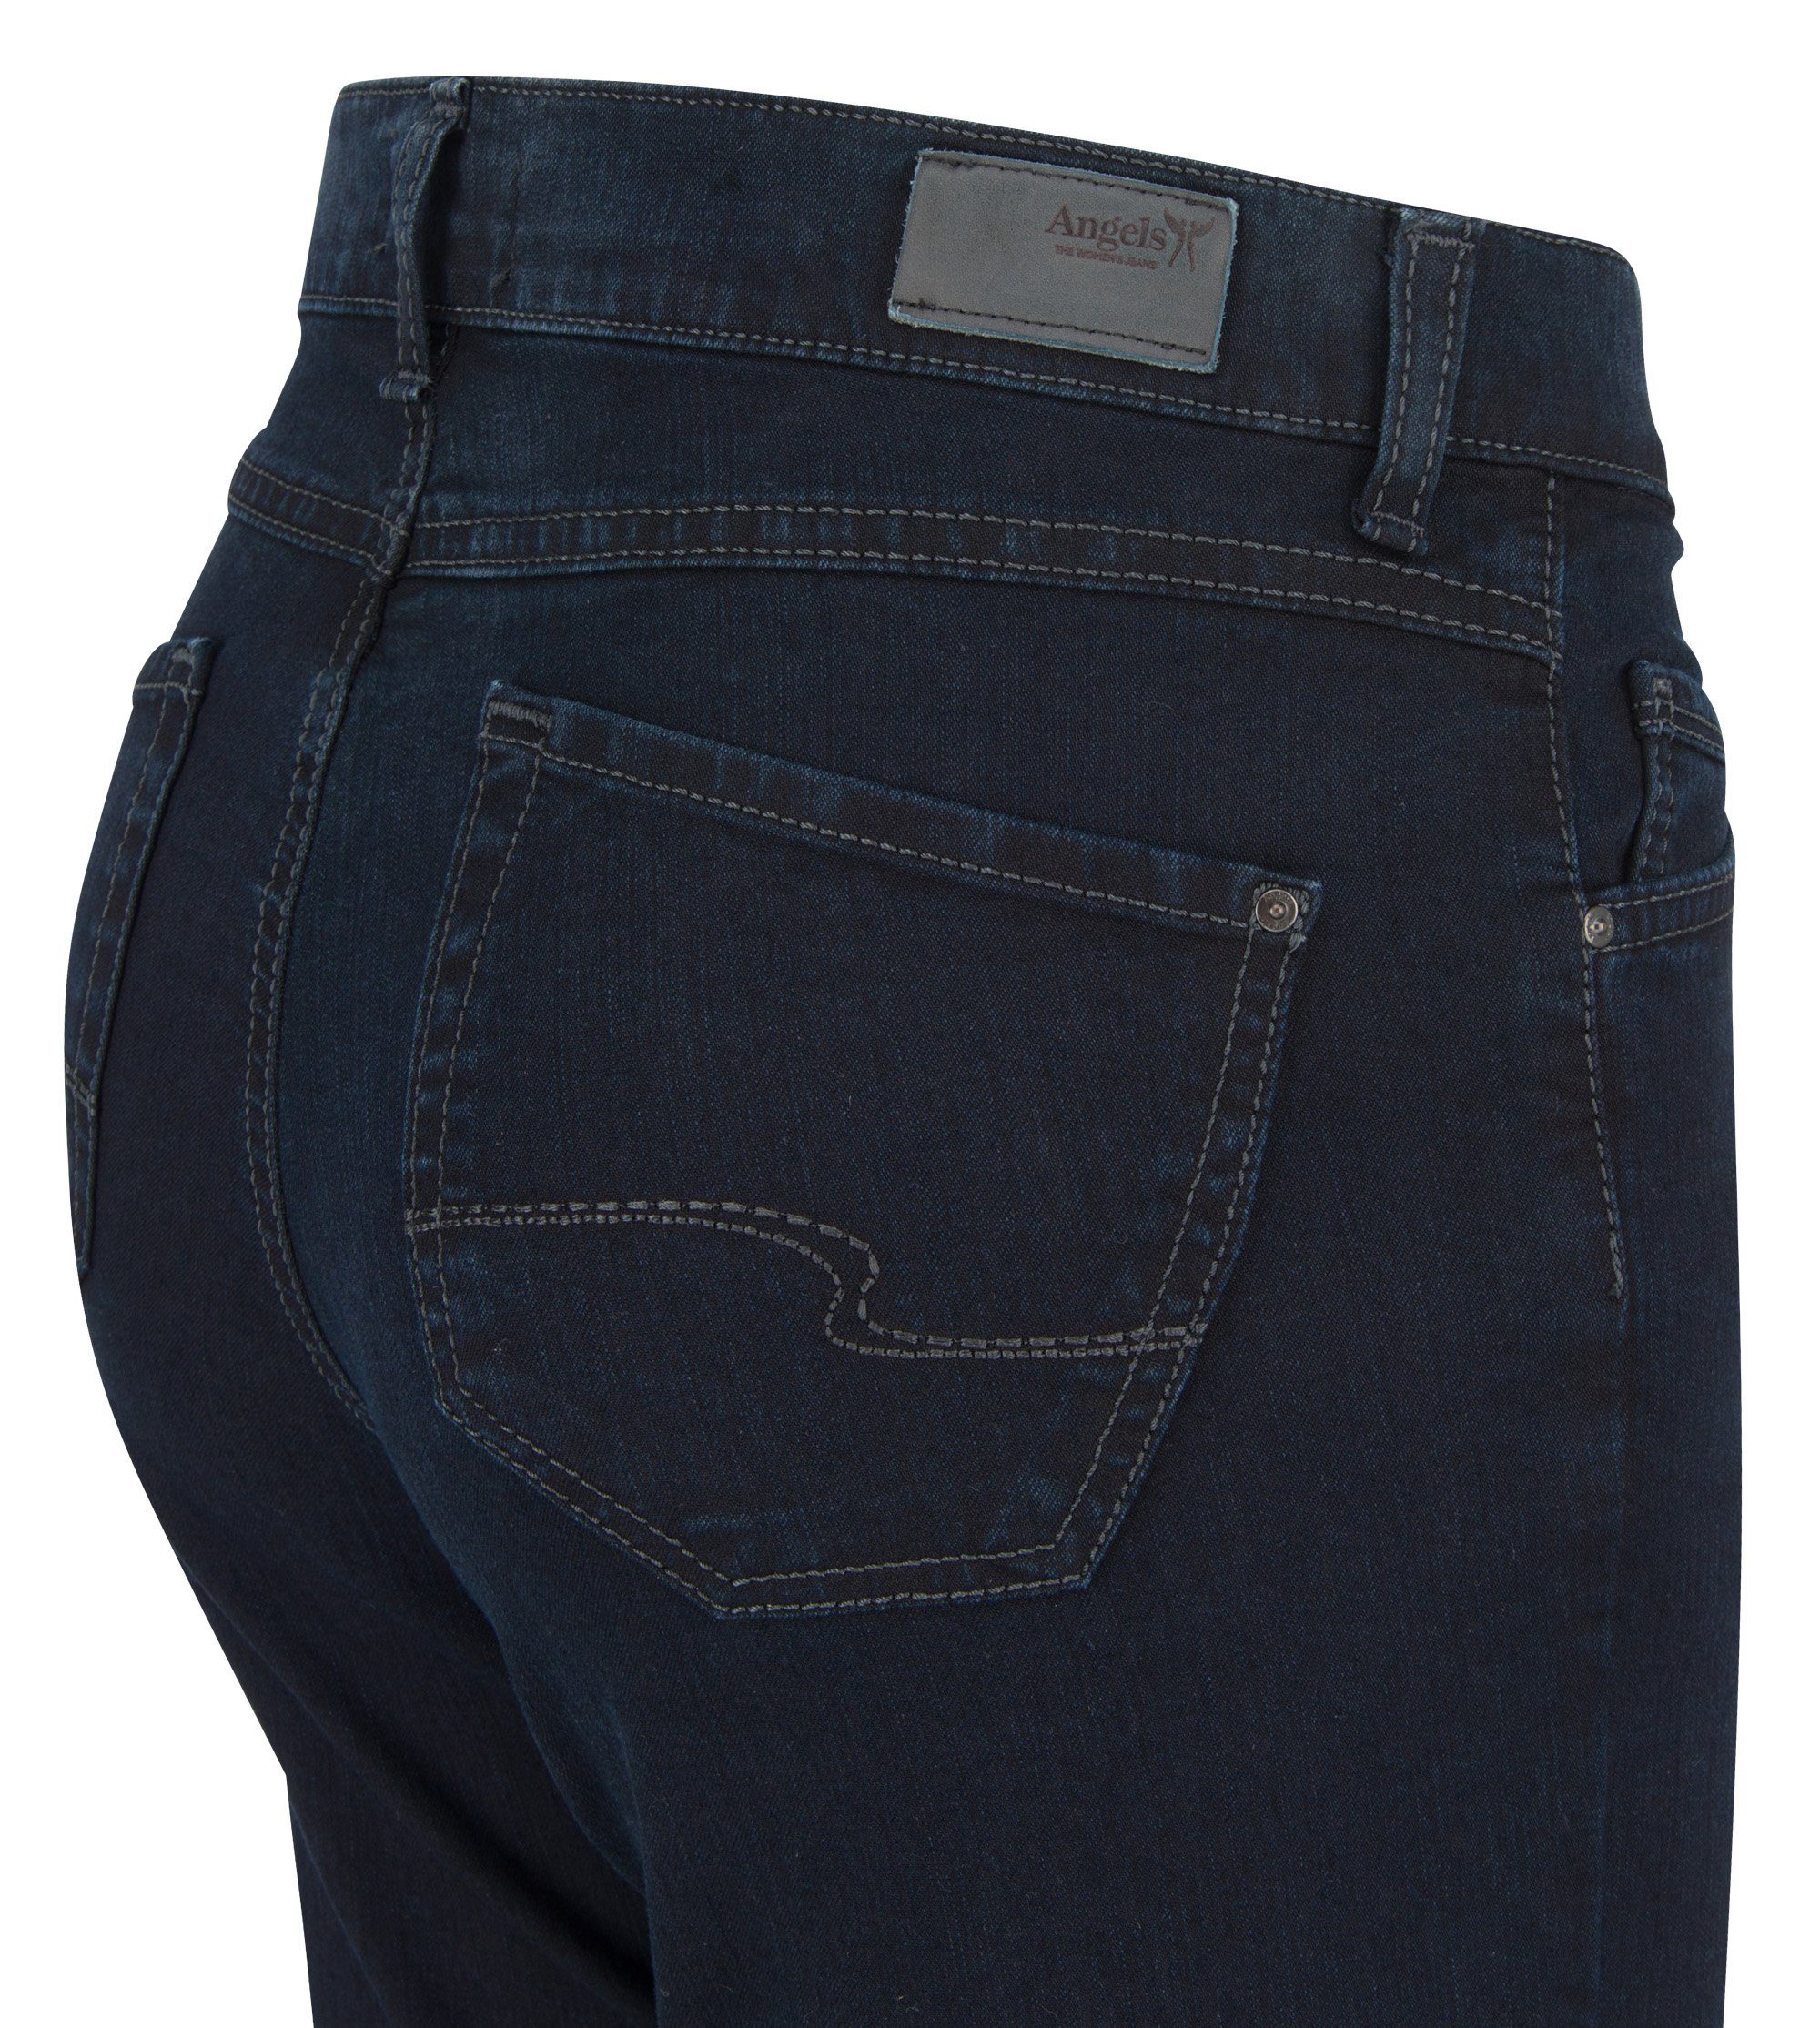 JEANS Stretch-Jeans ANGELS DOLLY black 80.200 74 ANGELS blue